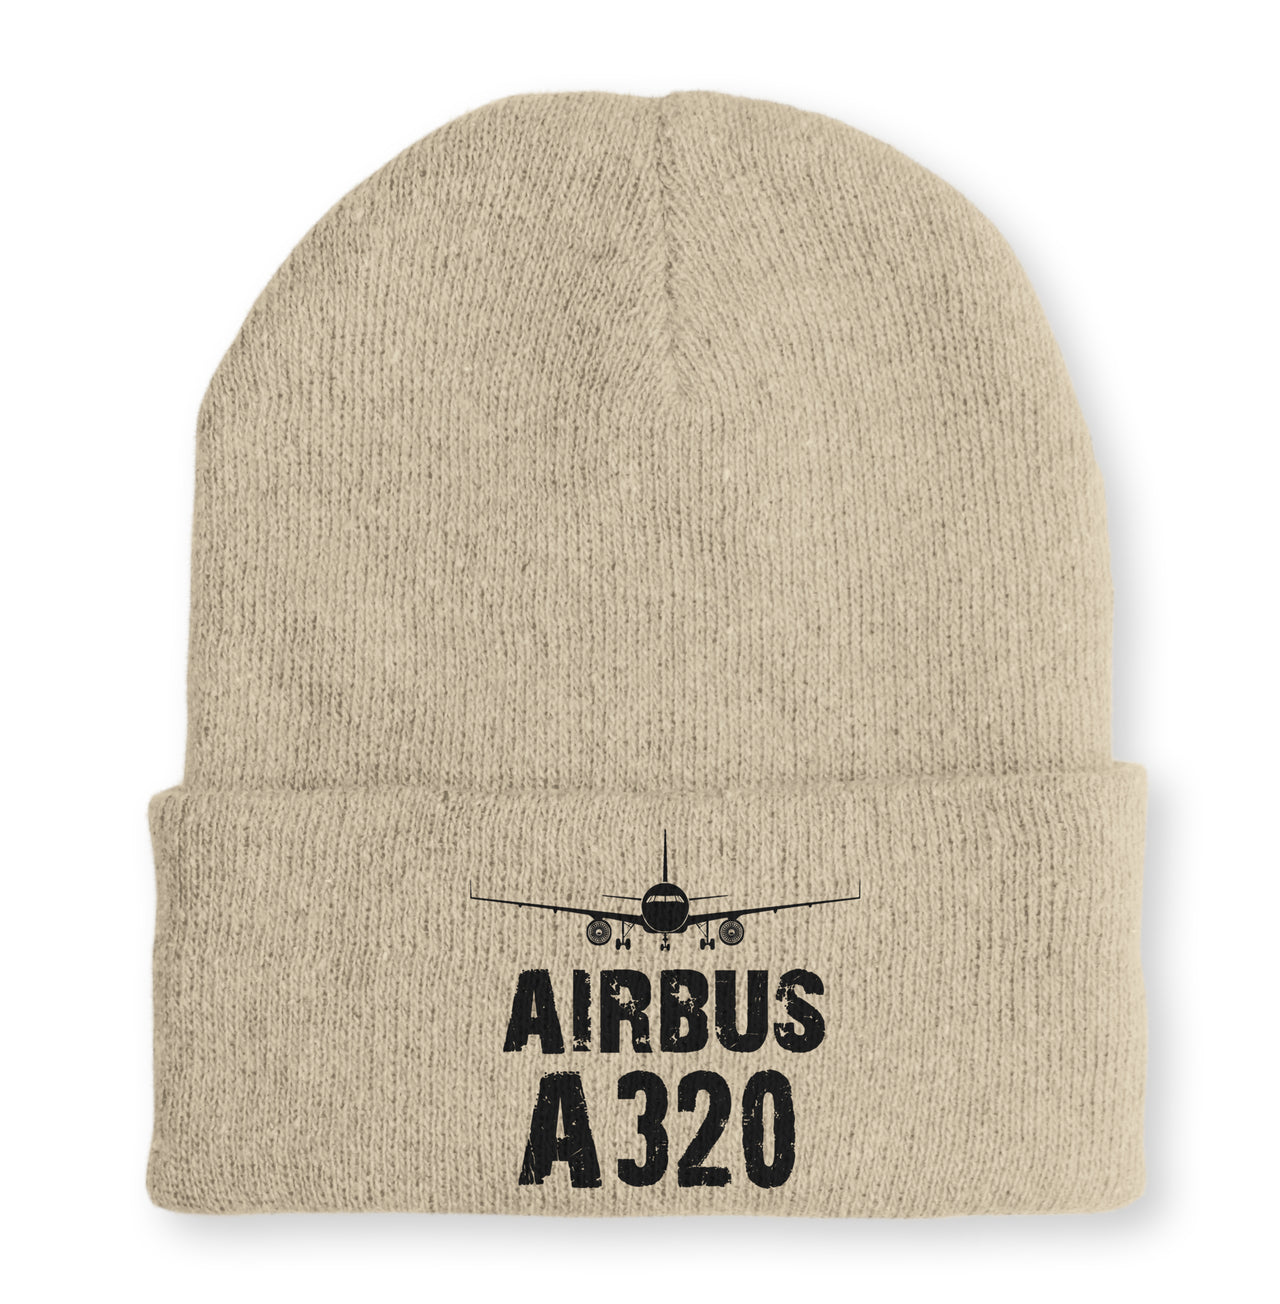 Airbus A320 & Plane Embroidered Beanies